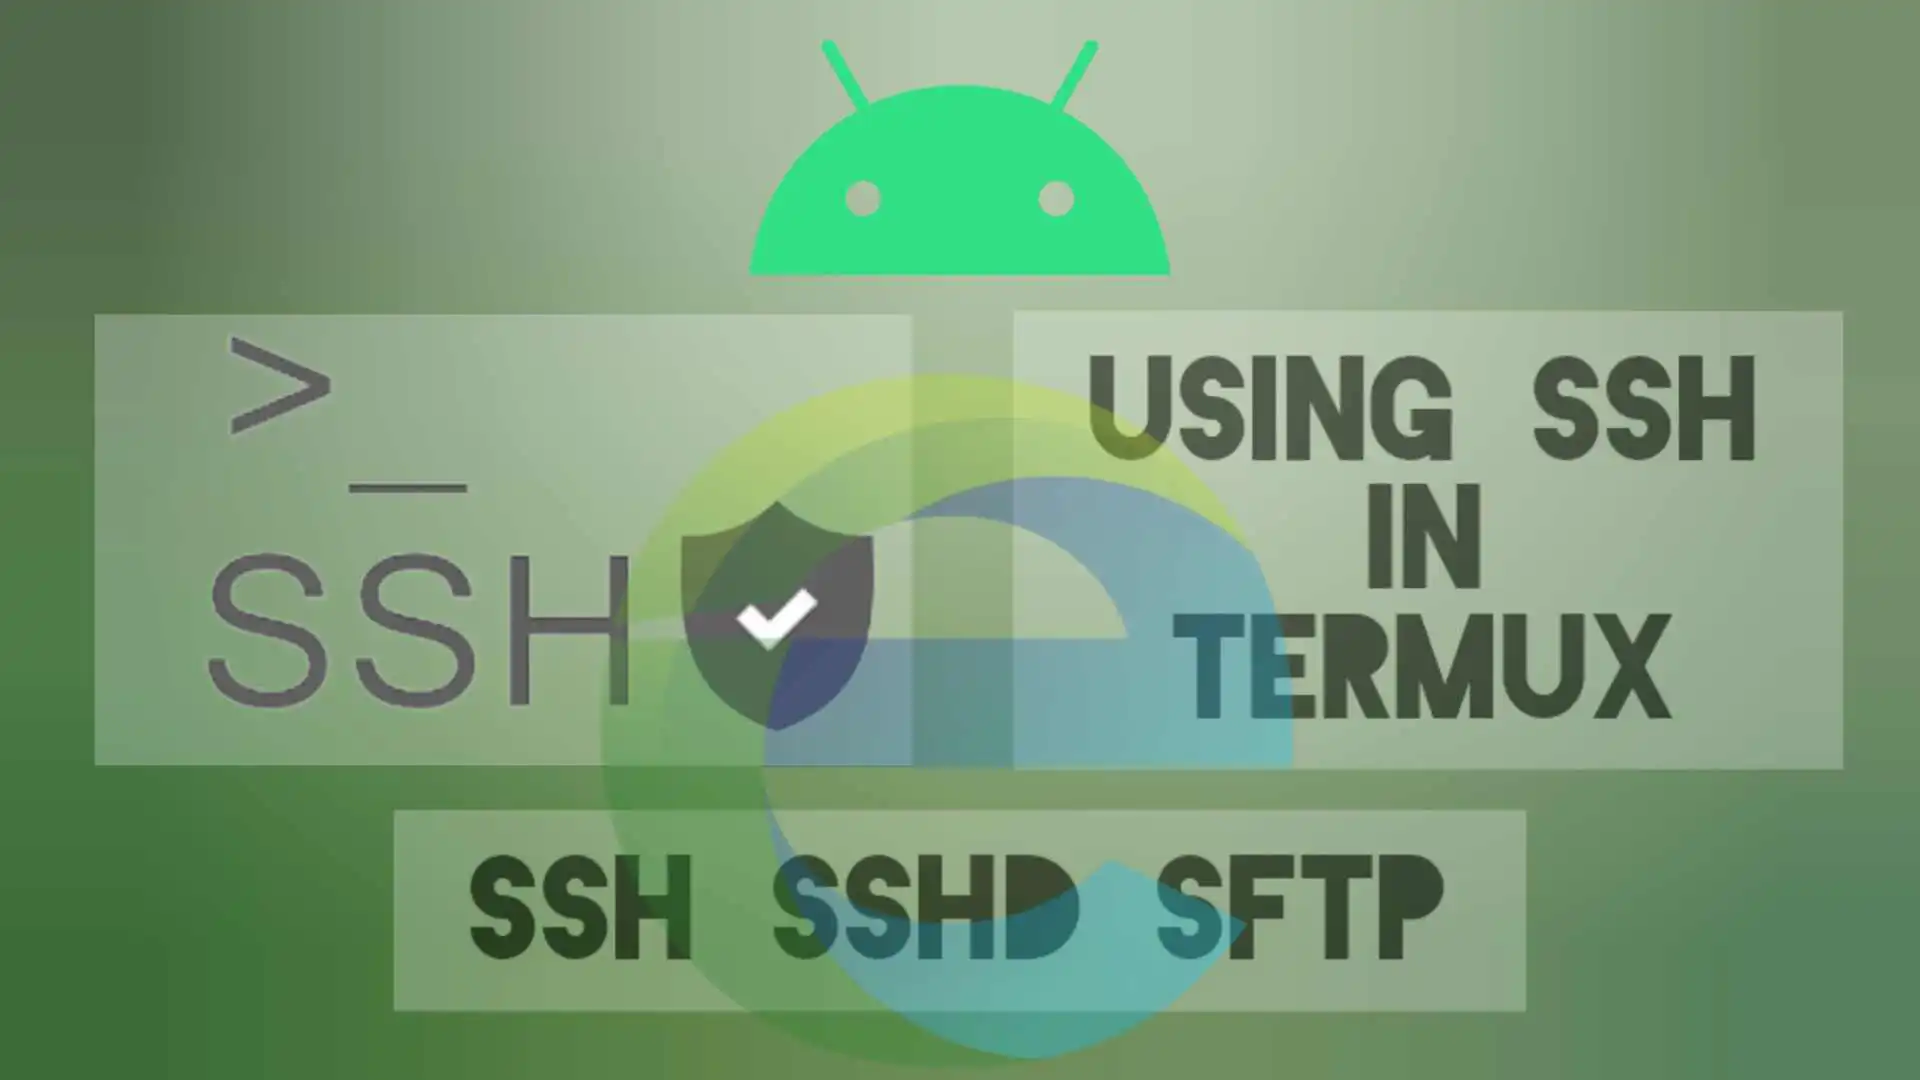 How To Install And Use SSH In Termux Android? - Easymux